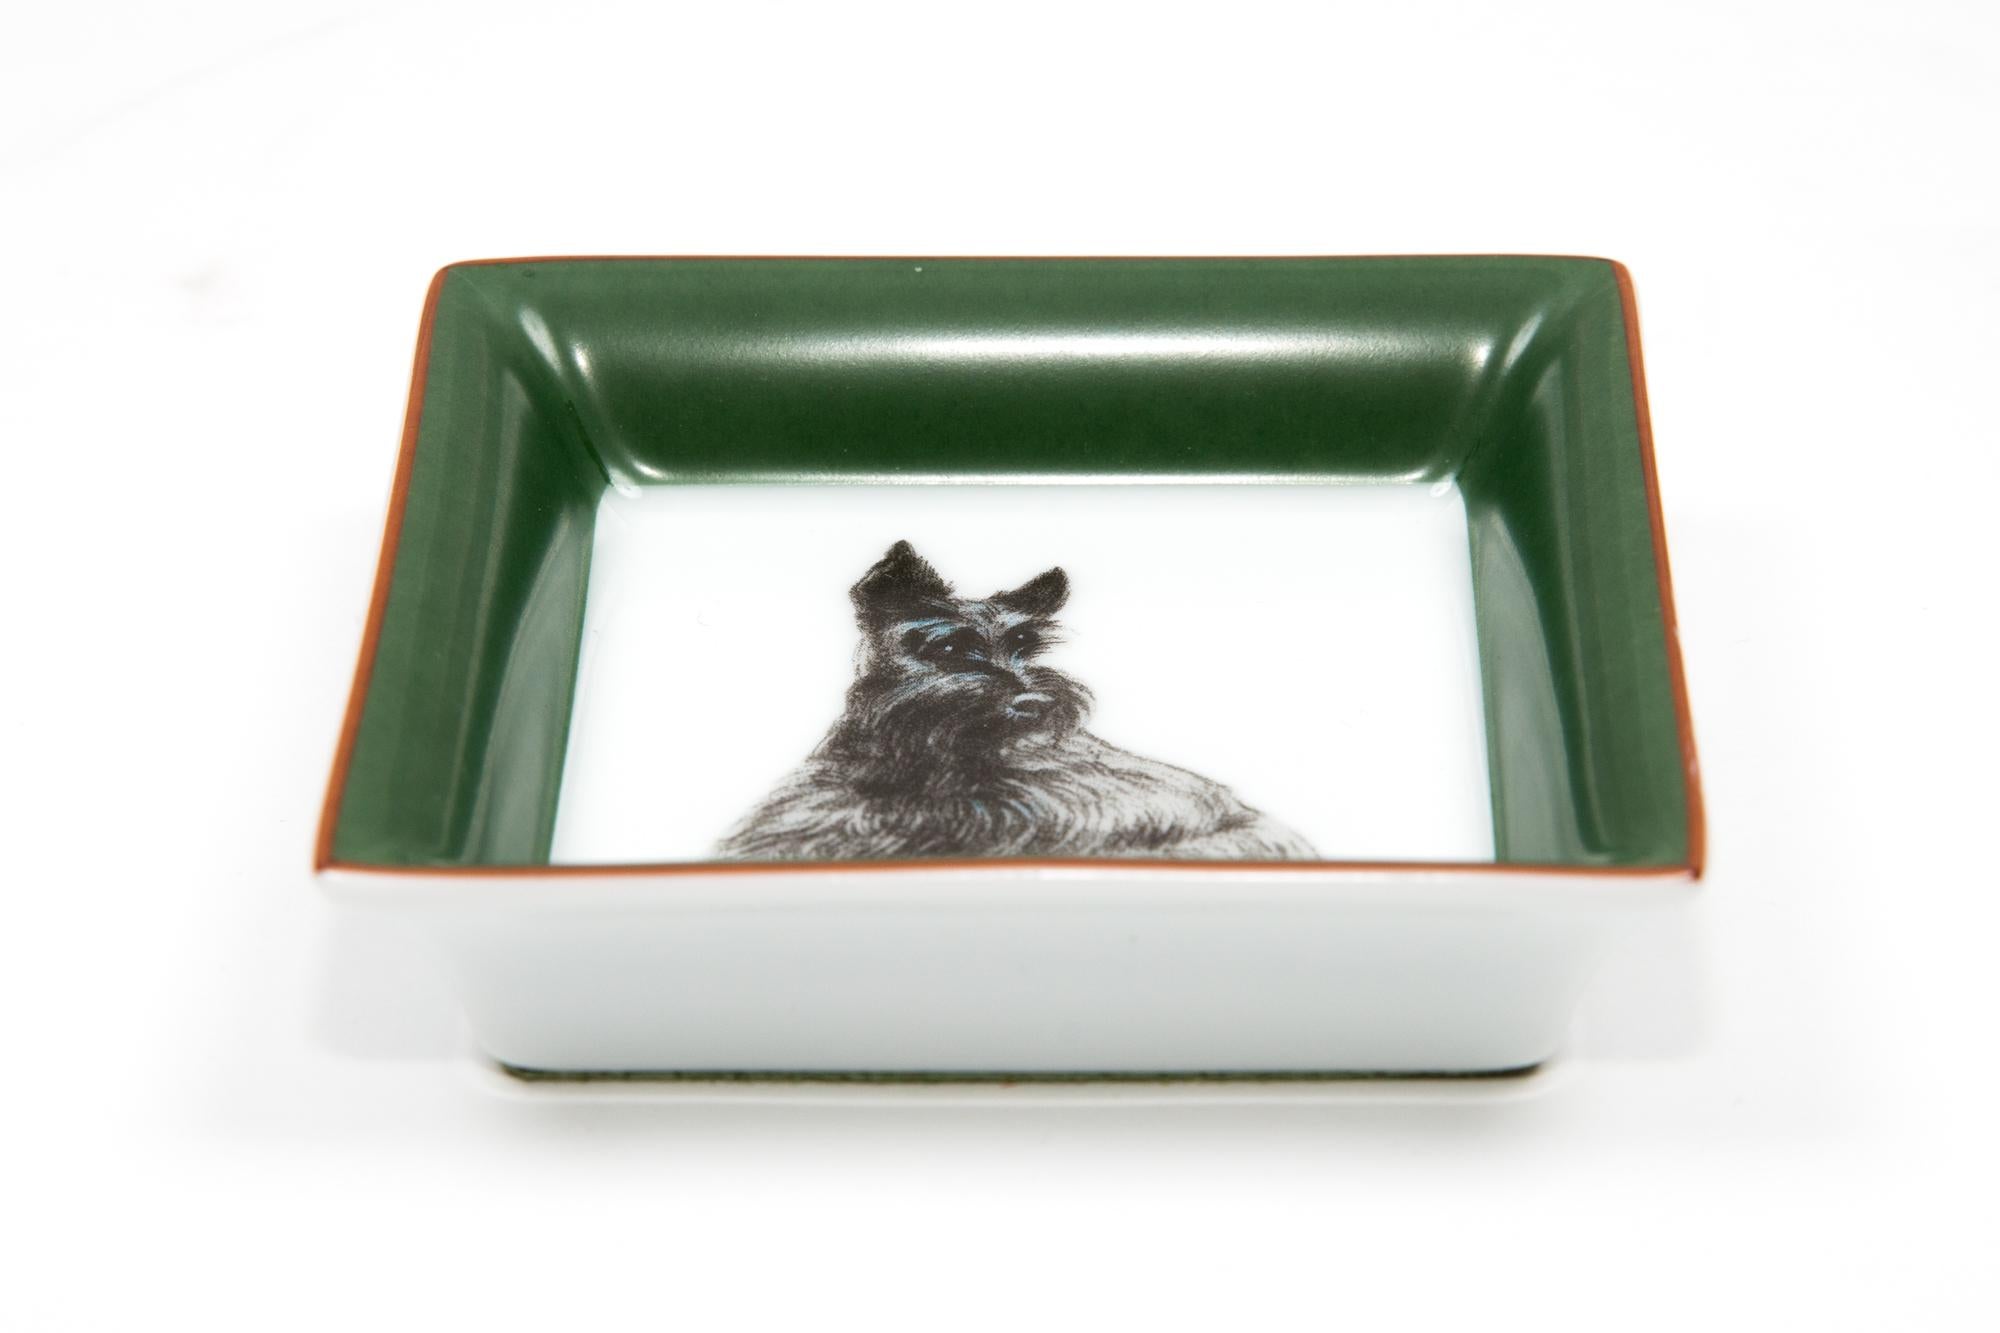 Hermès Scottish Terrier Dog Porcelain decorative organizer featuring a square shape, green contrasting trim, a Hermes signature. 
delivered in his original box.
Circa 2000s 
In good vintage condition. 
3.1in. (8cm) X 3.1in. (8cm)
We guarantee you